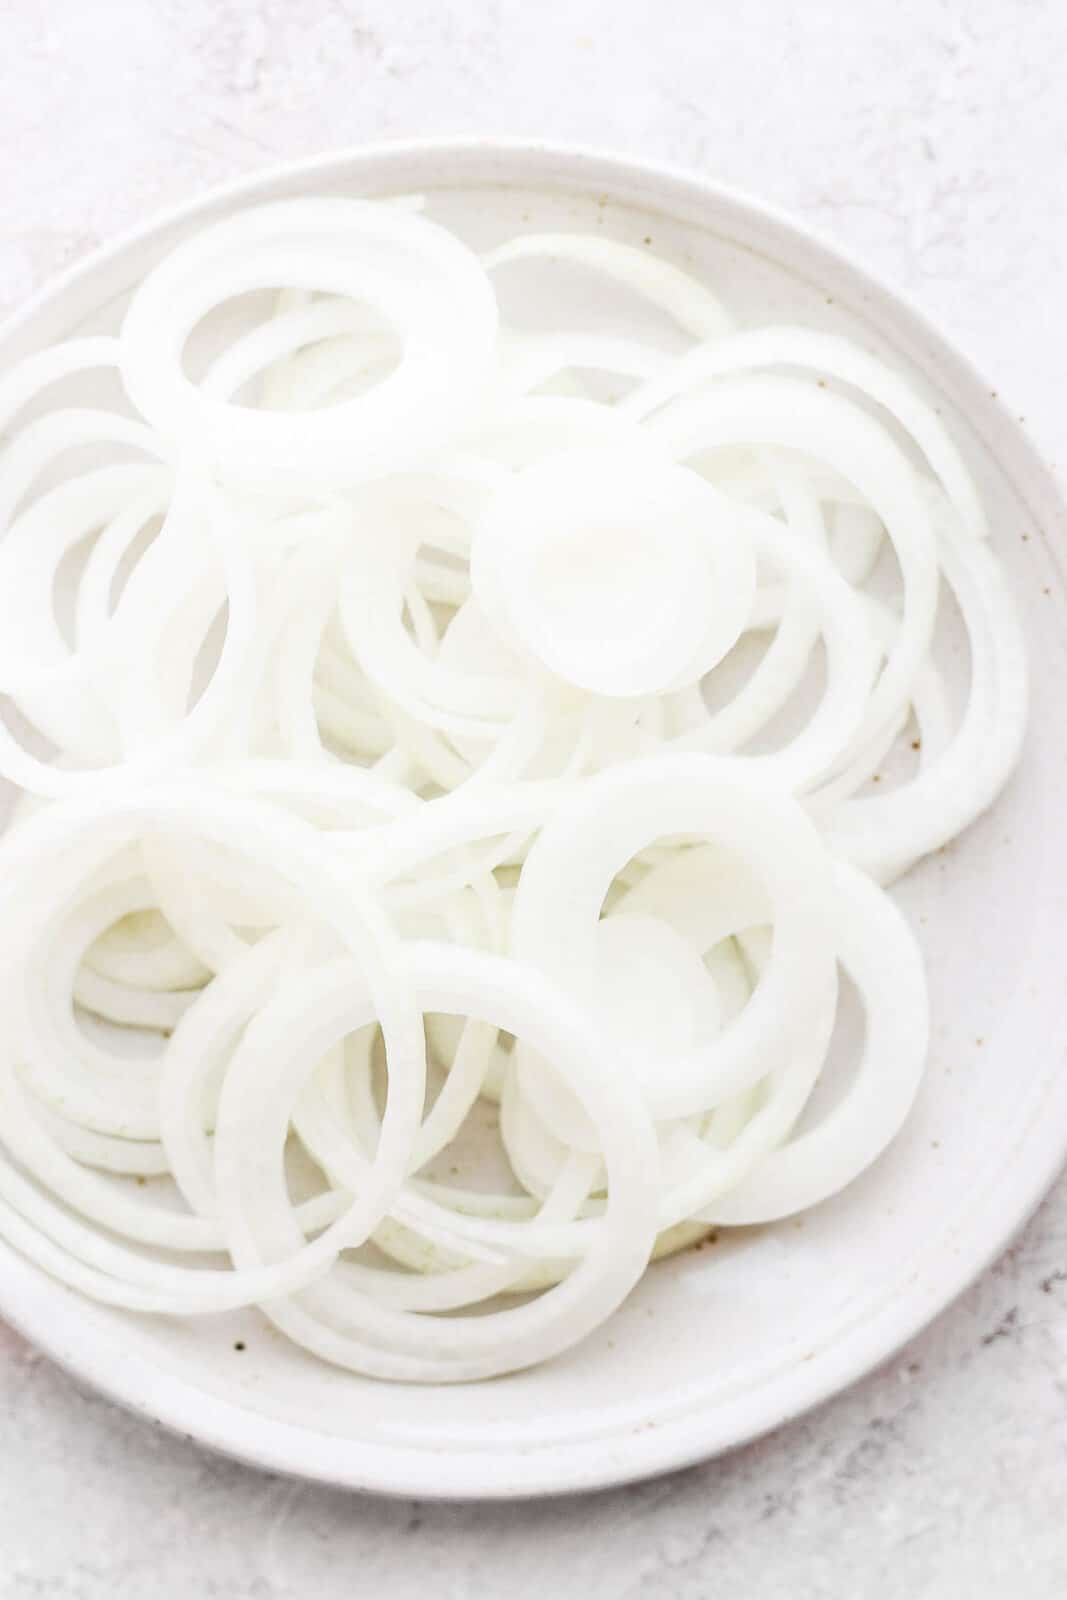 Thinly sliced yellow onions on a plate.